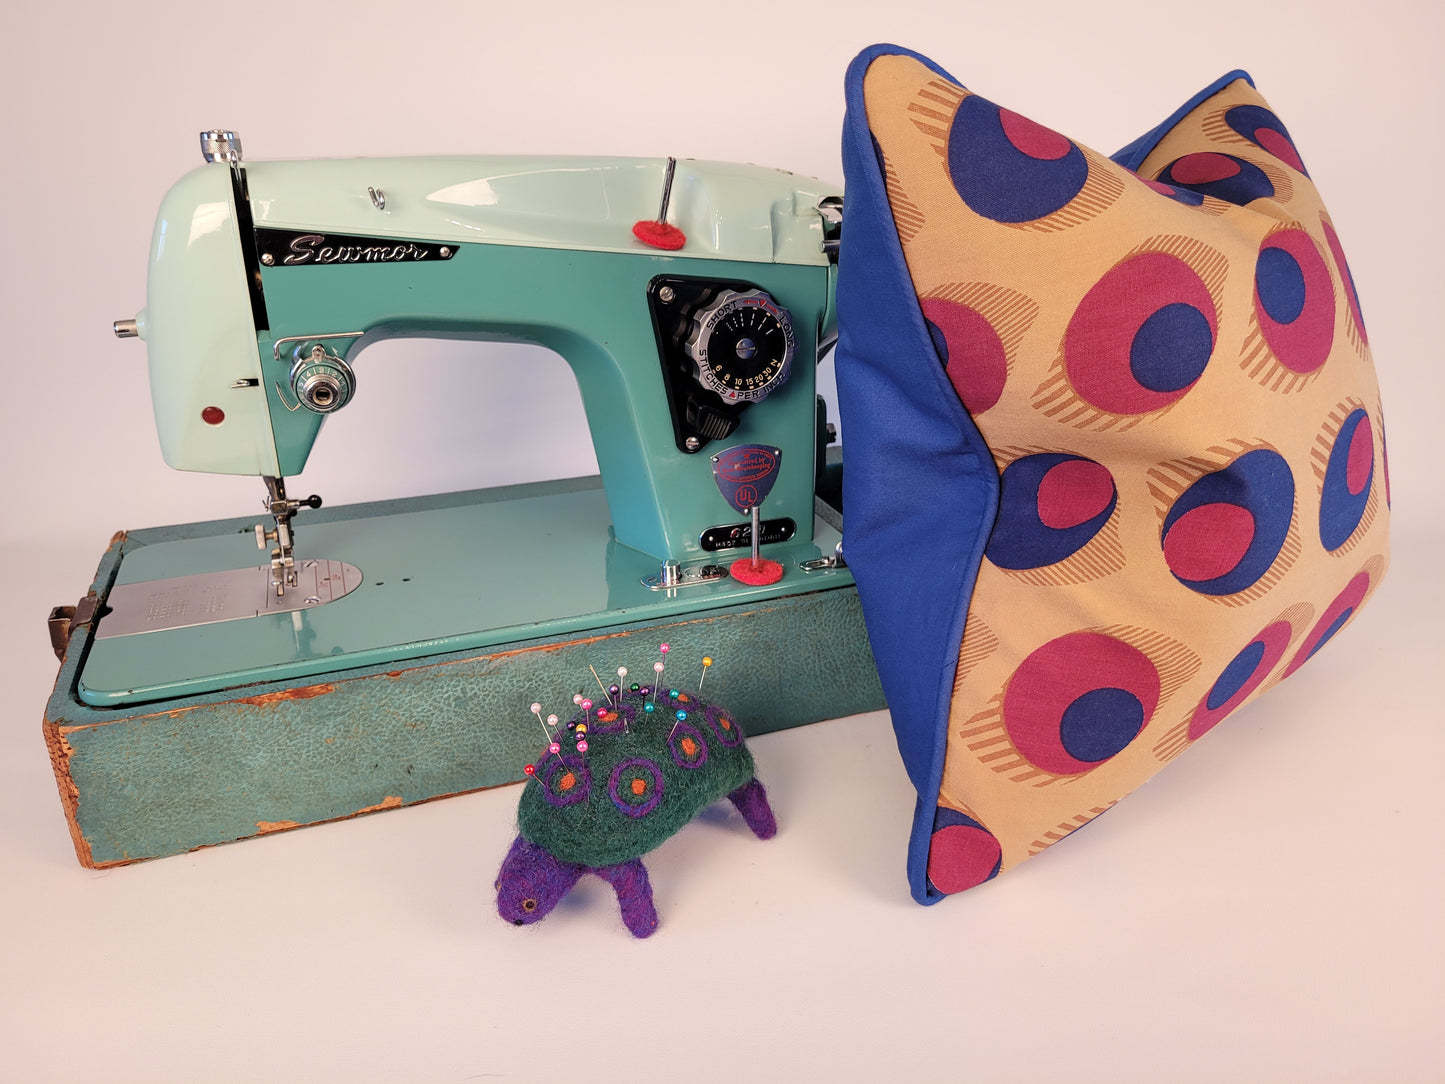 Vintage 1950s Blue, Purple and Brown "Olive" or "Eye" Pillow with Welt 16" handmade on sewmor vintage sewing machine from 1955